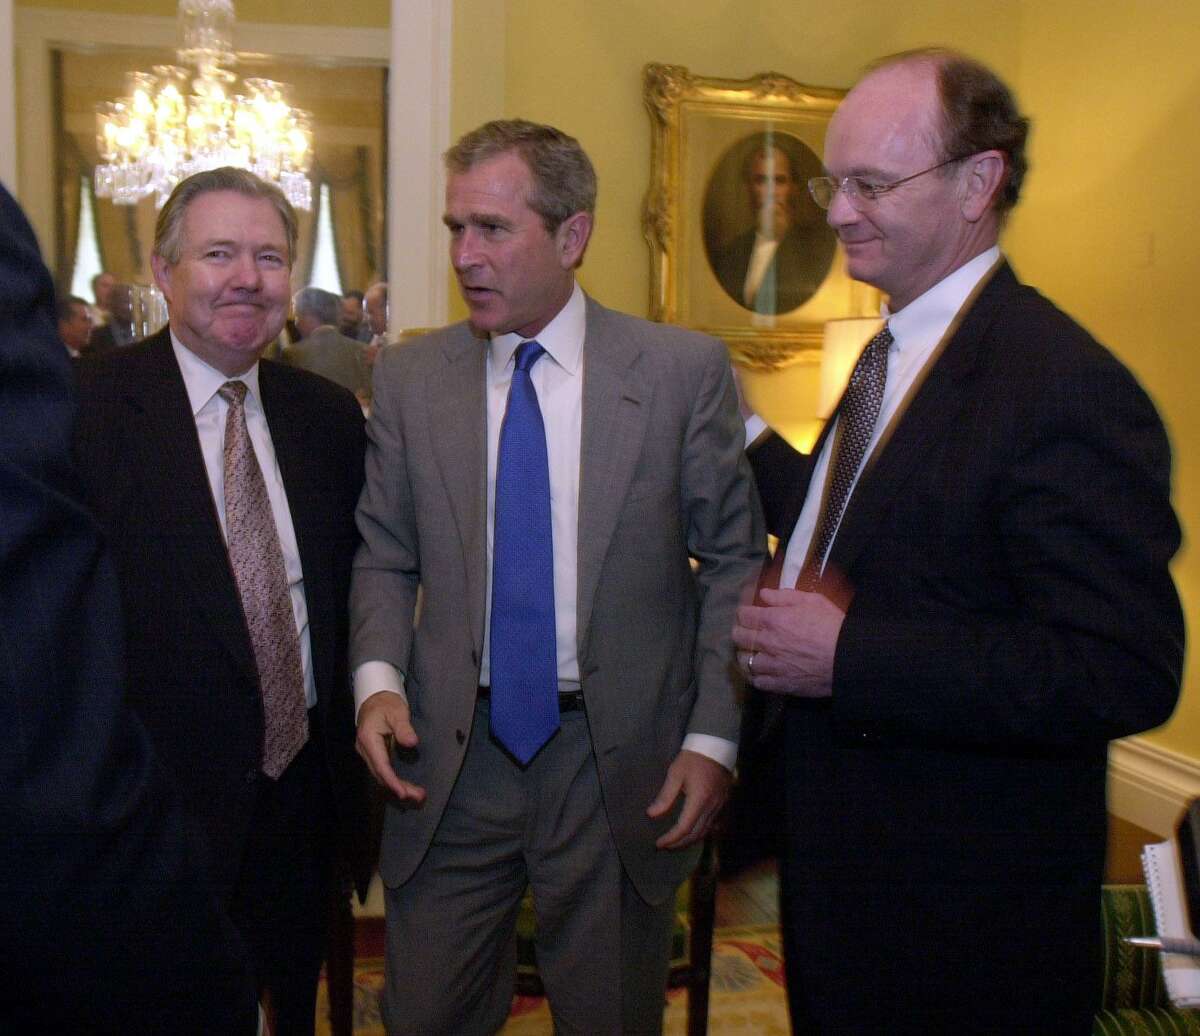 George B. Irish with then-Texas Gov. George W. Bush, center, and Hearst Corp. executive Frank Bennack, left, at the Governor’s Mansion in Austin on June 7, 2000. Irish, a former publisher of the San Antonio Light and other Texas newspapers, was a Hearst executive for 29 years. He died Tuesday at 78.